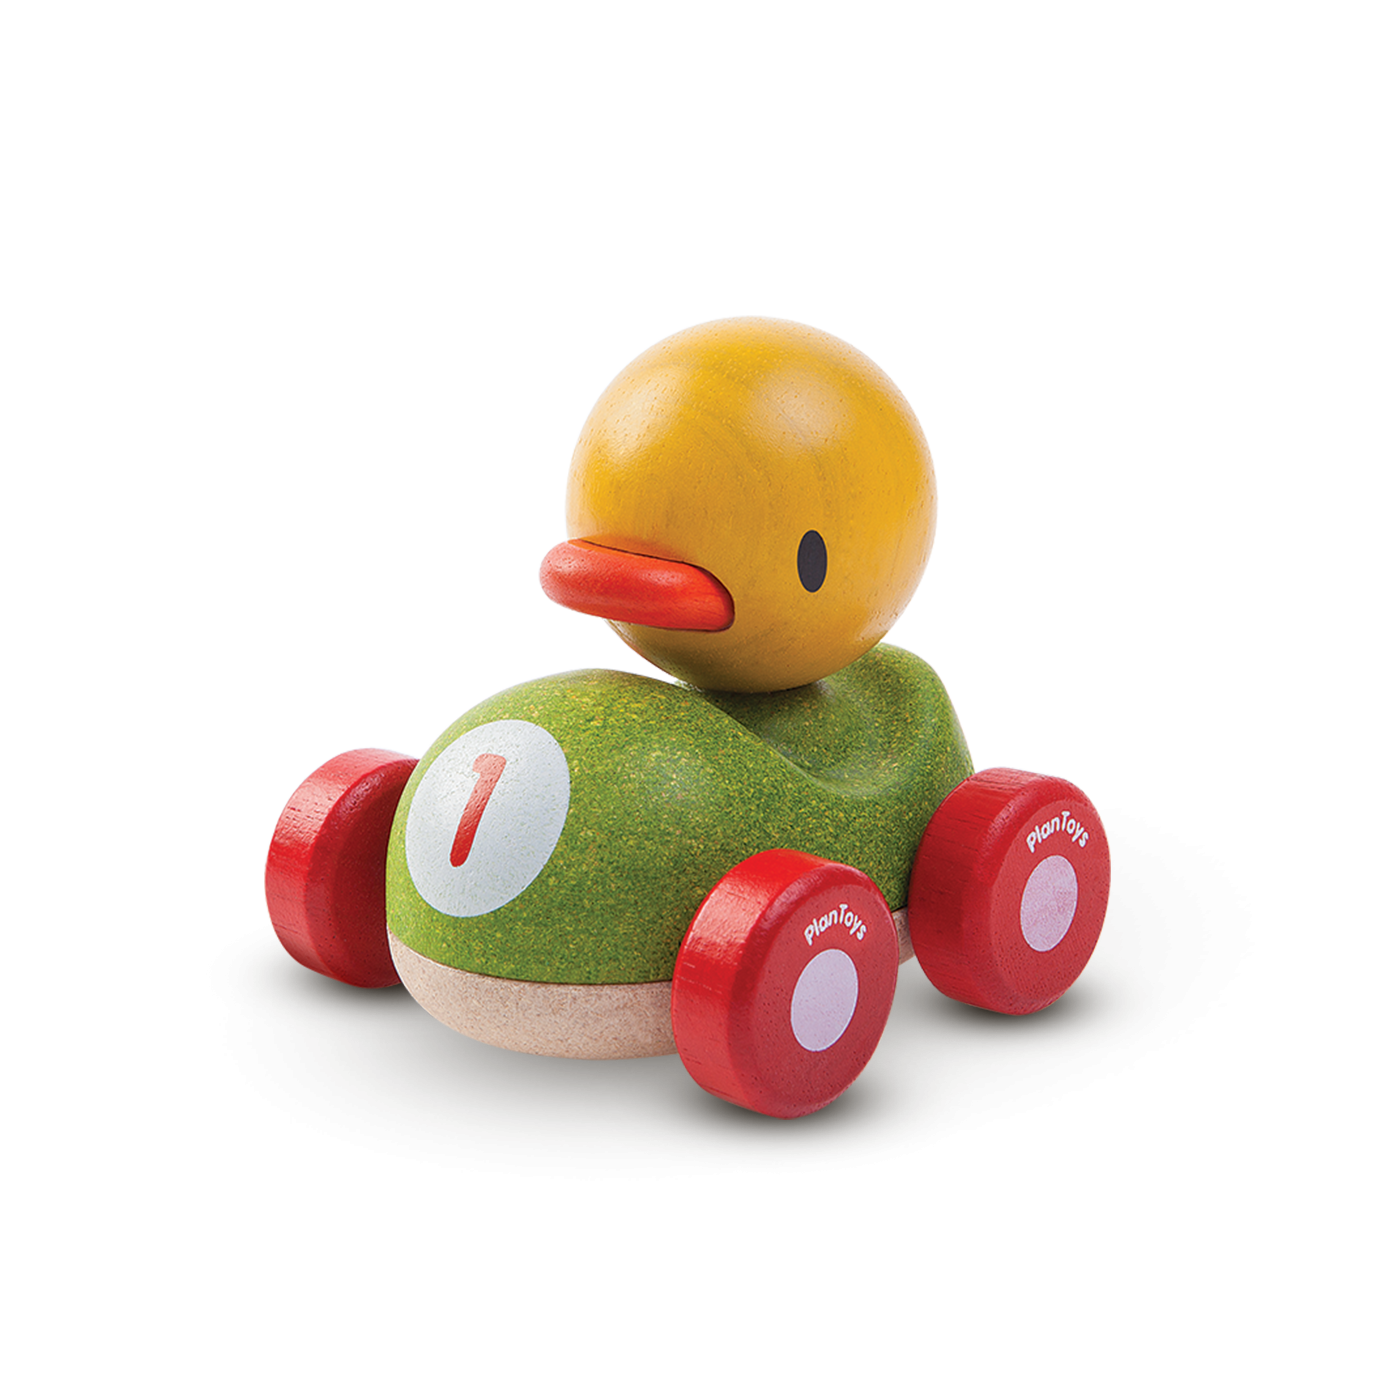 5678_PlanToys_DUCK_RACER_Active_Play_Fine_Motor_Imagination_Language_and_Communications_12m_Wooden_toys_Education_toys_Safety_Toys_Non-toxic_0